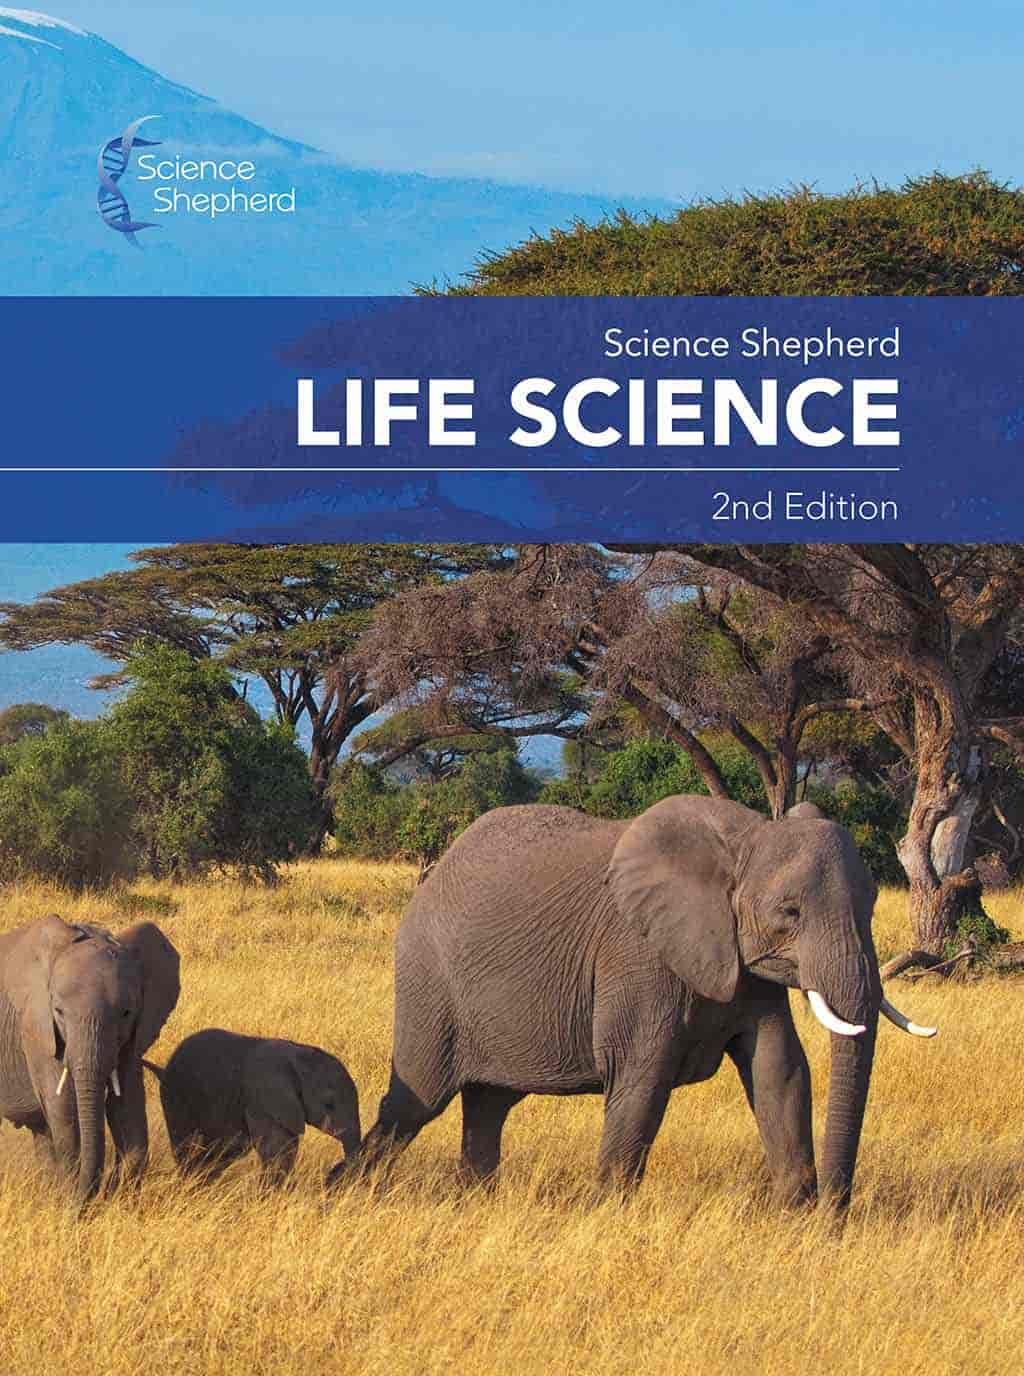 Middle school science curriculum homeschool cover of a family of elephants on the savanna